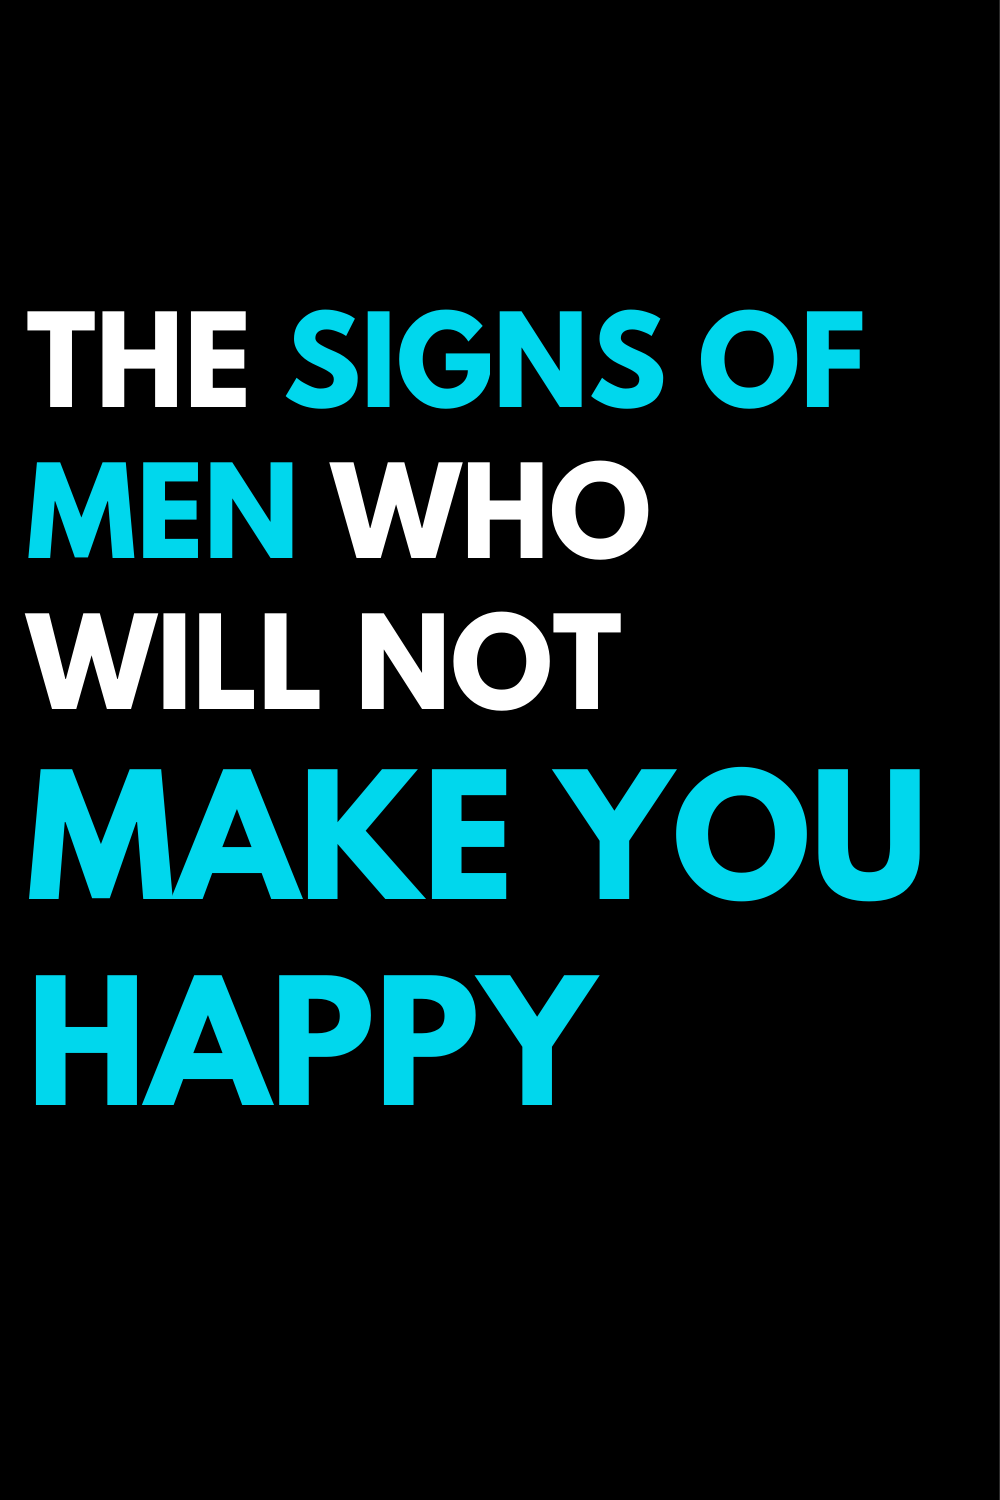 The signs of men who will not make you happy